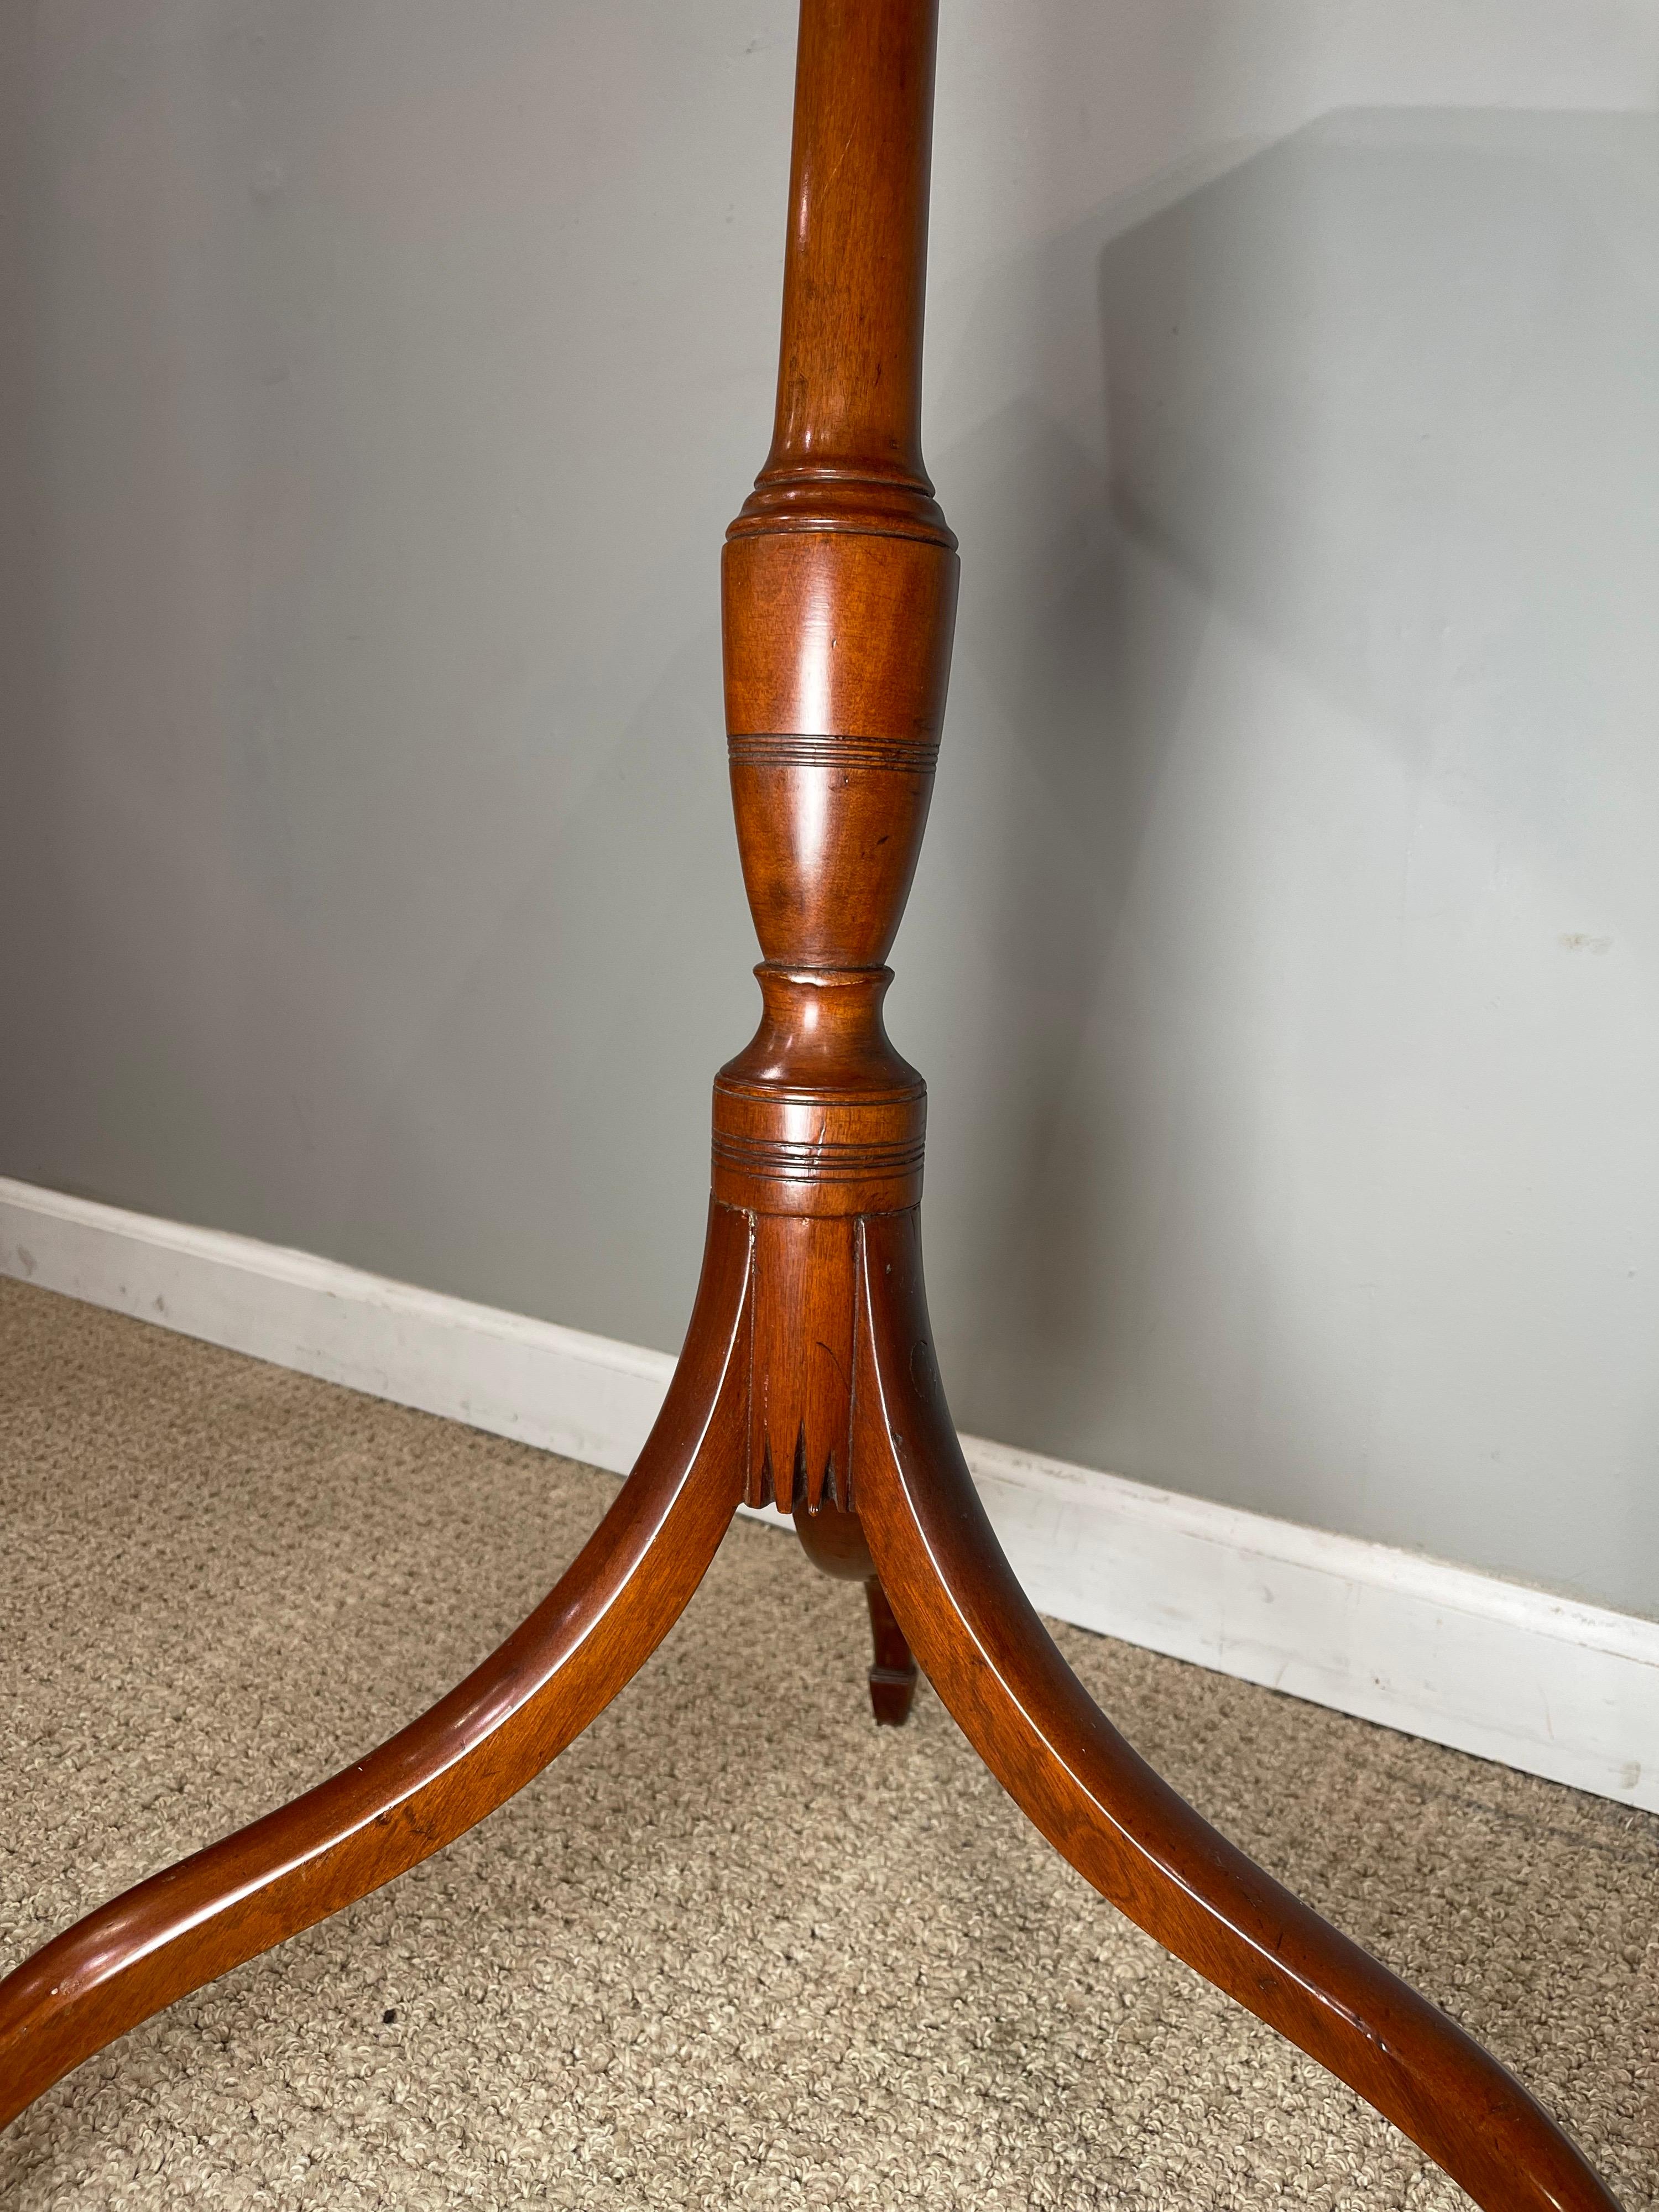 Wood Federal Tiger Maple Tripod Table, American, Early 19th Century For Sale